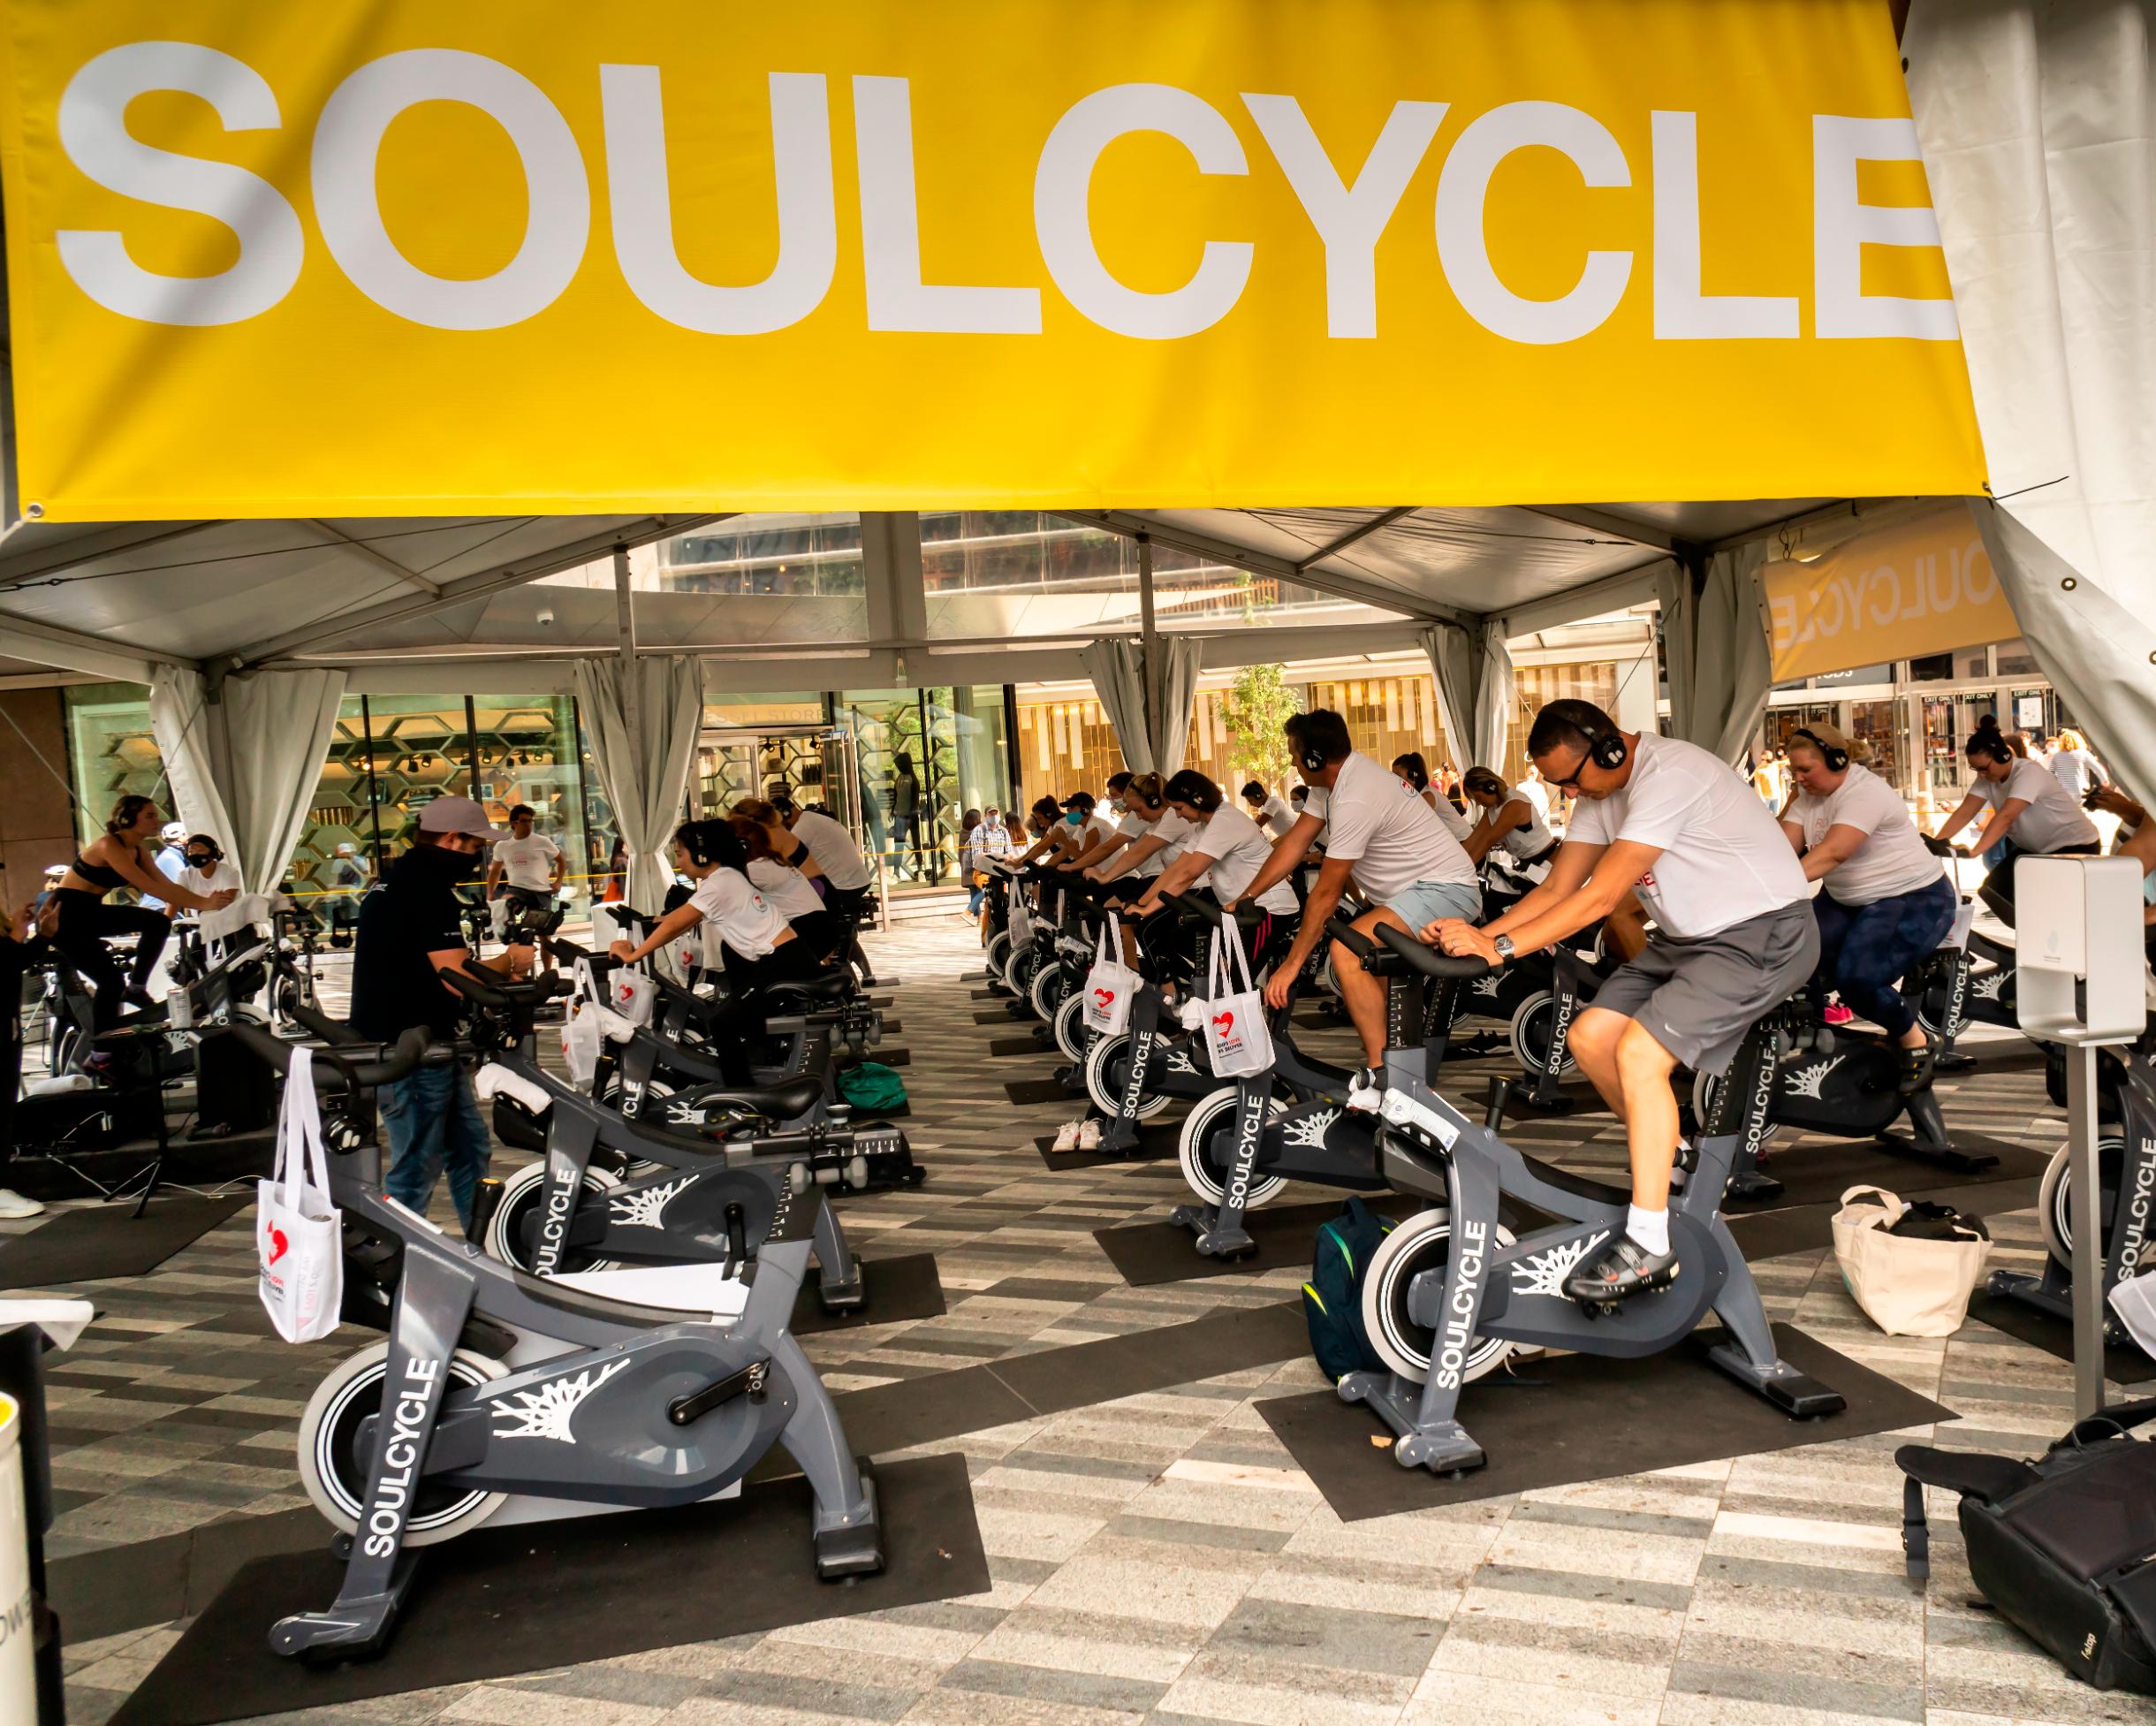 SoulCycle is closing 25% of its studios